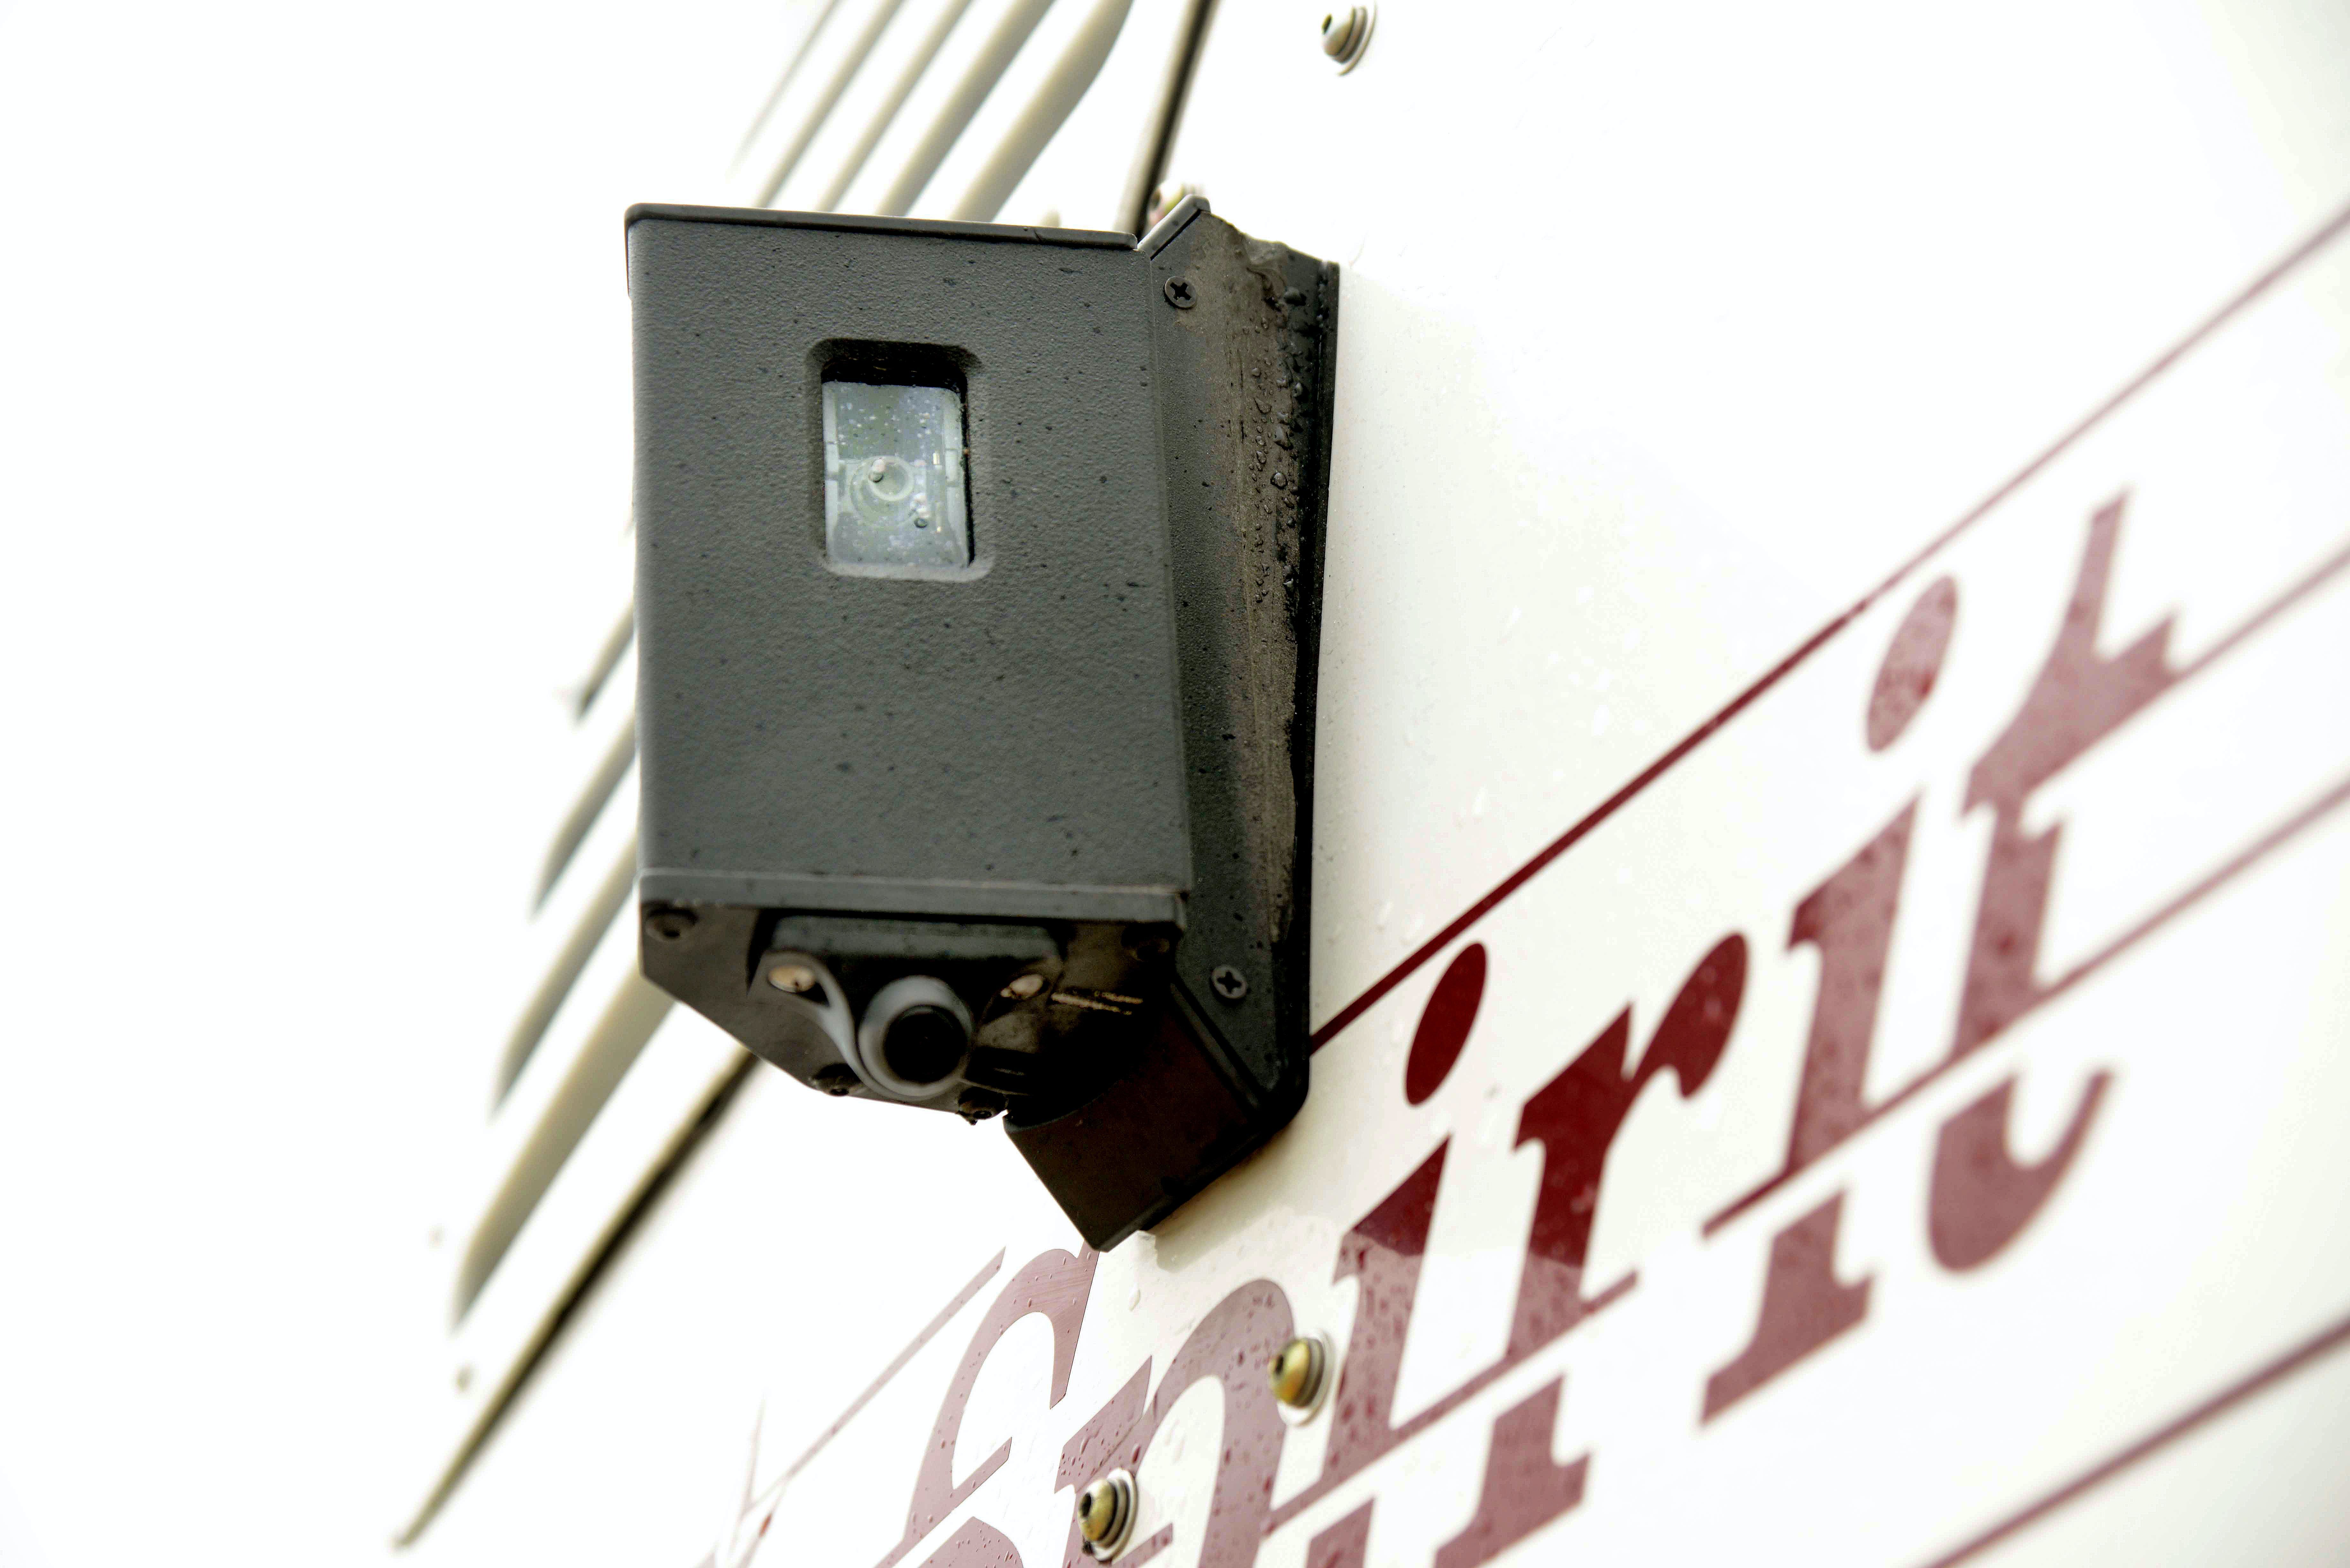 Exterior-mounted cameras work with the technology embedded in the bus cab to alert drivers of potential hazards or obstructions.